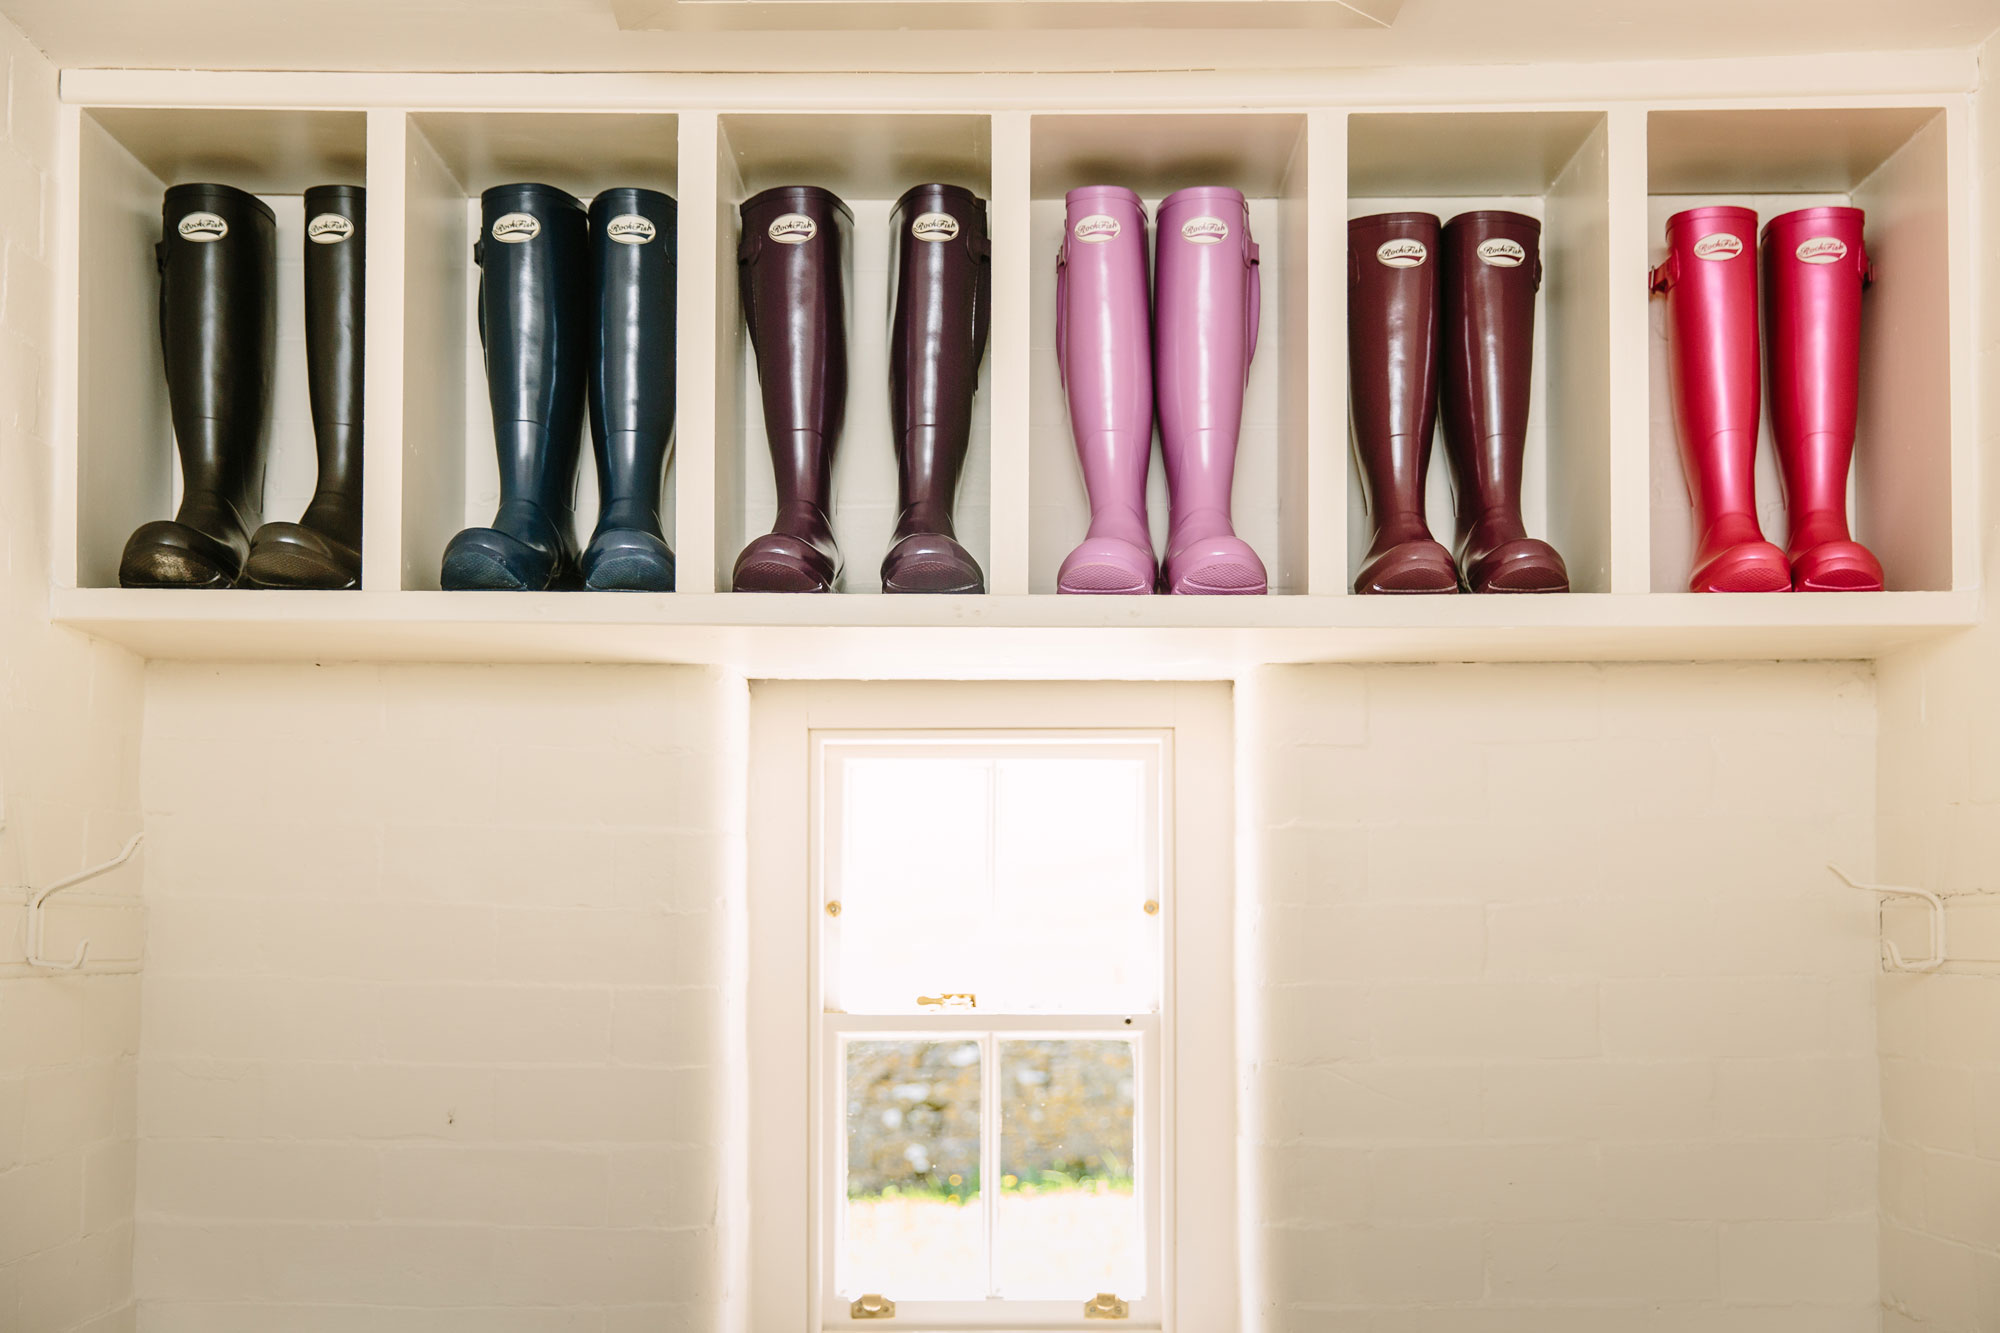 More shots of wellies - we think they look pretty, but they are also essential sometimes!